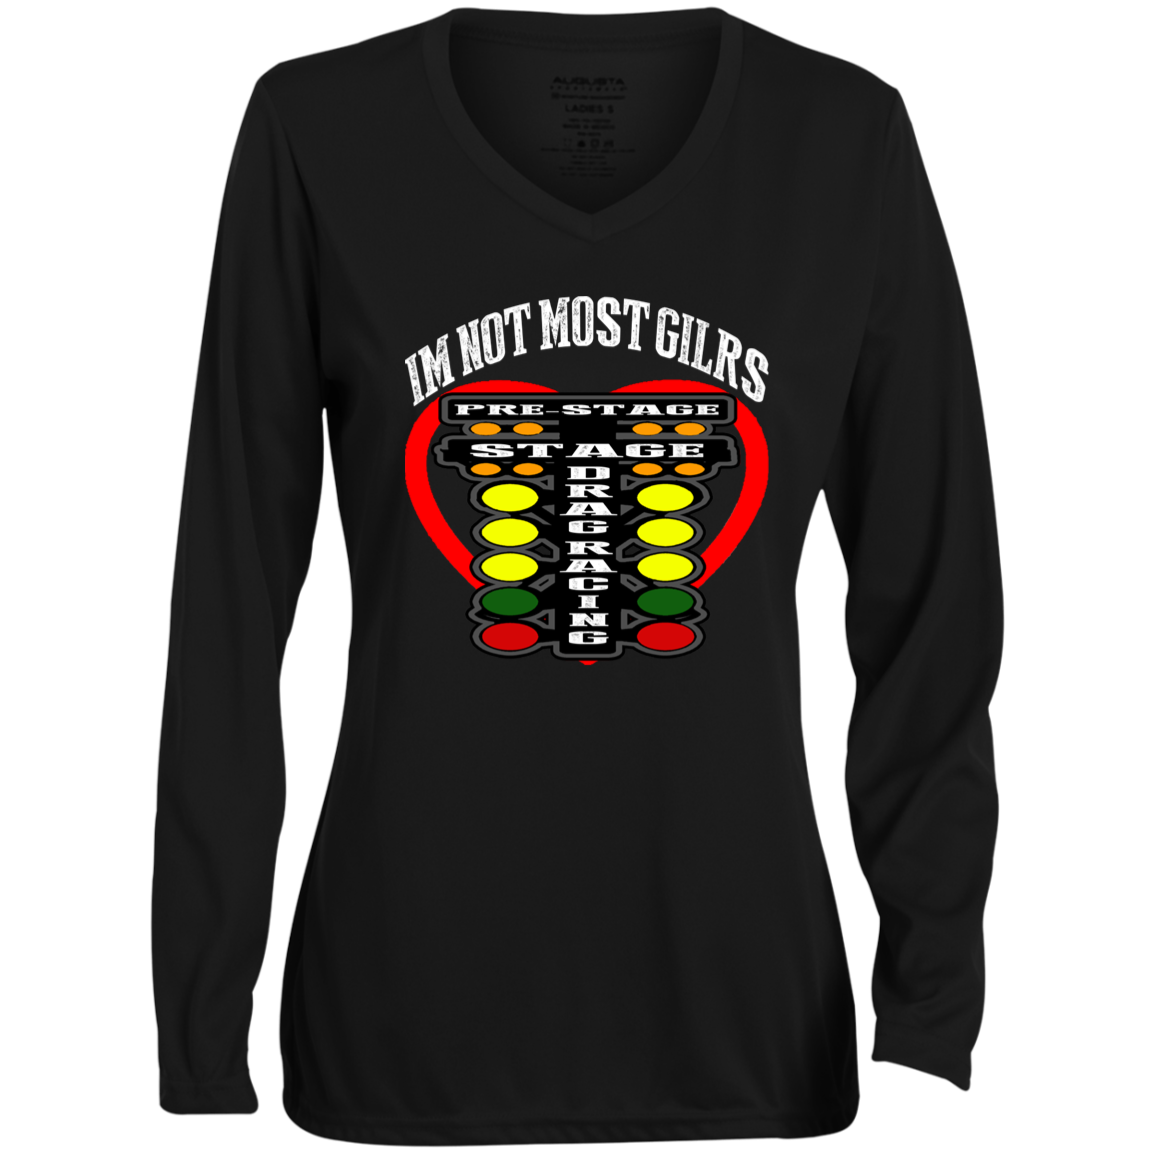 I'm Not Most Girls Drag Racing Ladies' Moisture-Wicking Long Sleeve V-Neck Tee